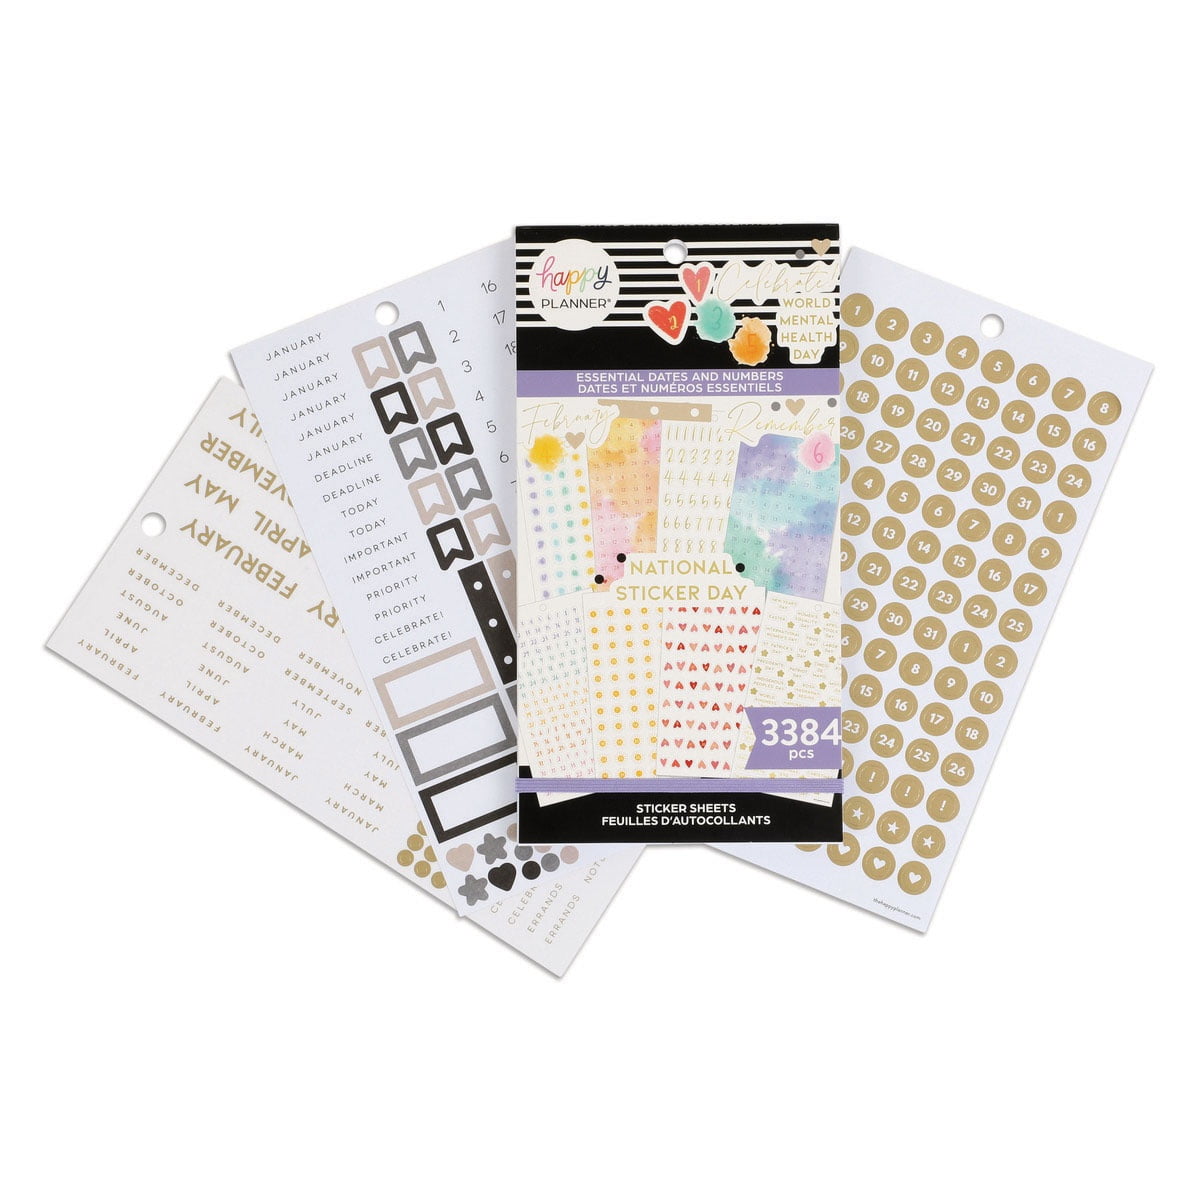 Value Pack 20 Sheets/826 Planner Stickers for Adults Any Activity